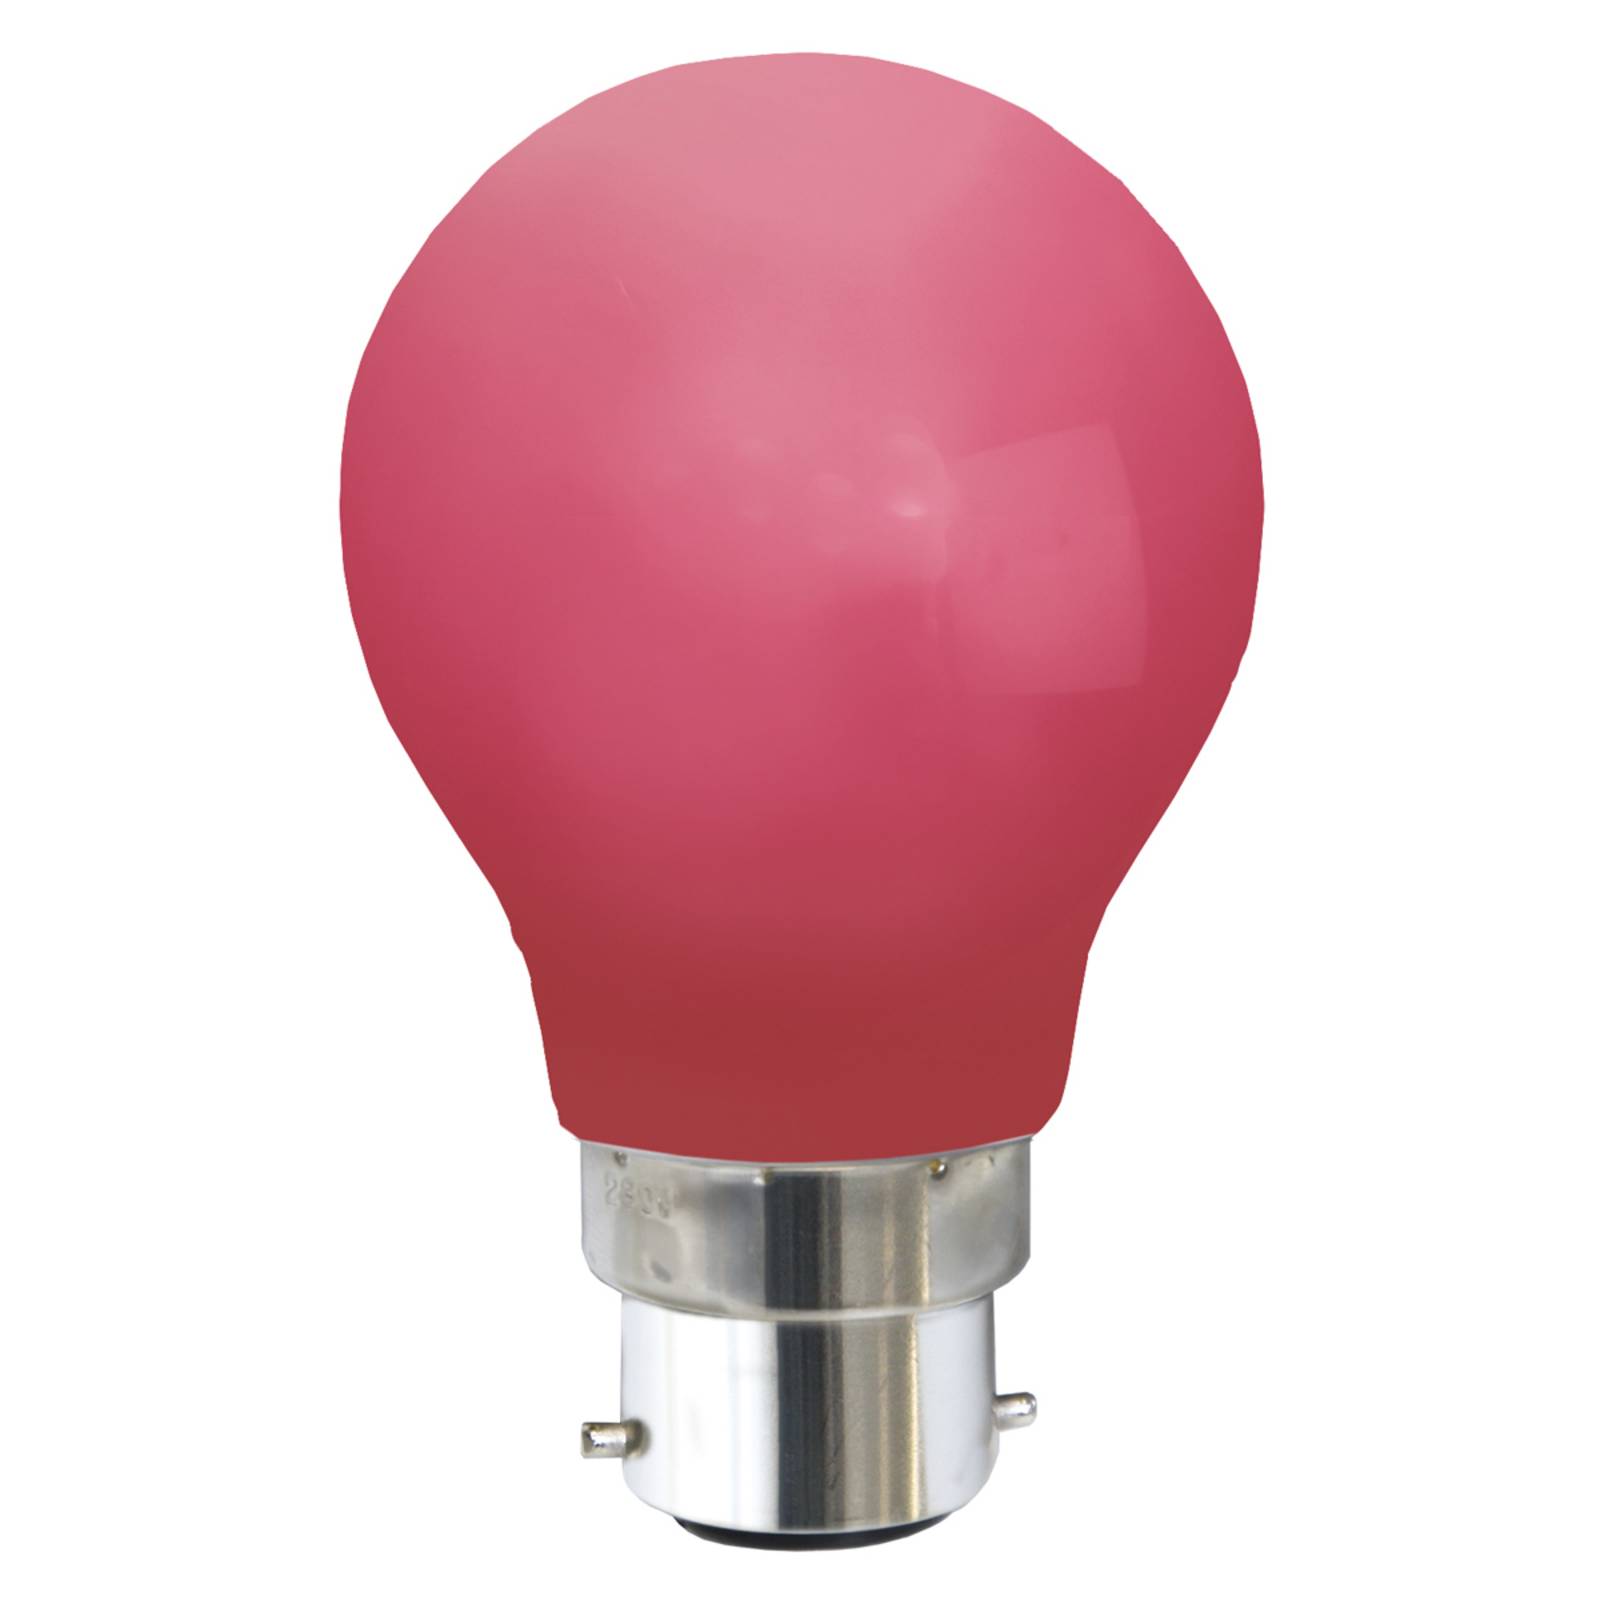 Accommodatie Sophie dubbellaag B22 0,9W LED lamp, rood | Lampen24.nl